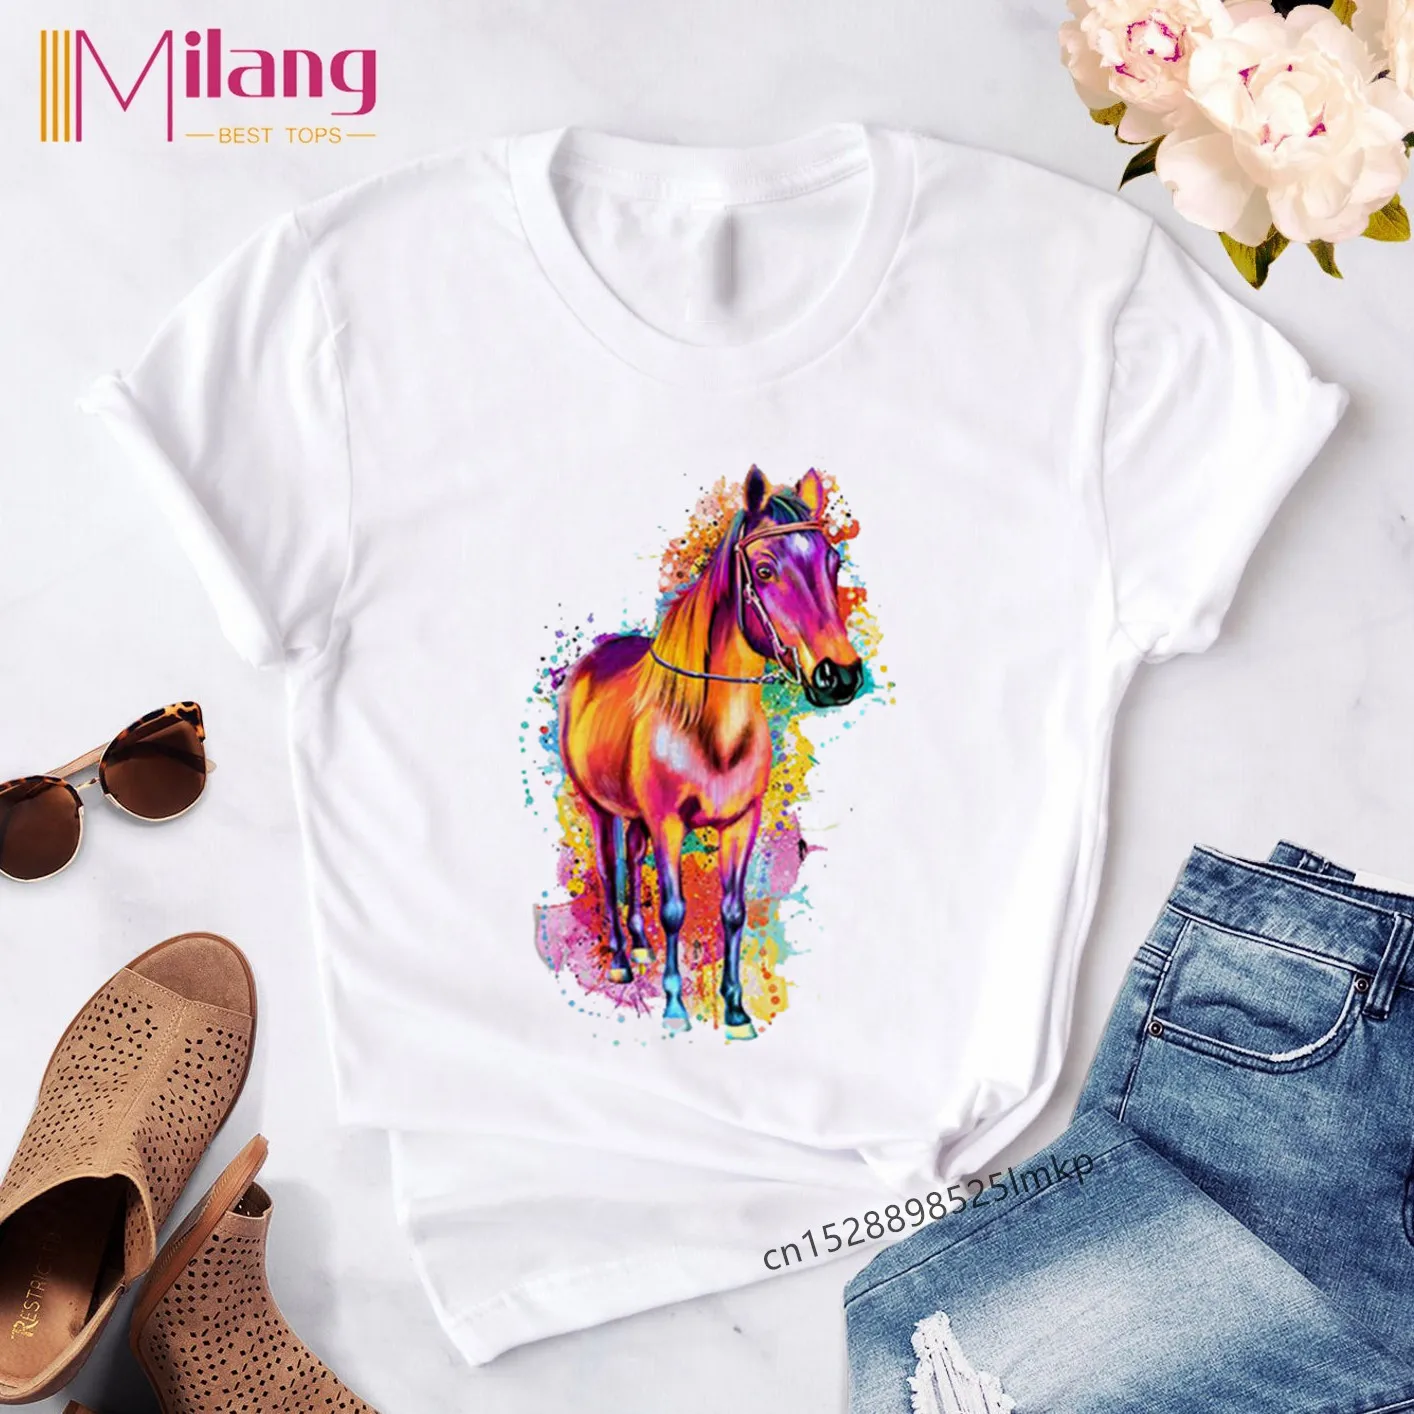 

Watercolor Horse Tshirts White Top Shirt Summer Aesthetics Graphic Short Sleeve Polyester T Shirts Female Camisetas Verano Mujer